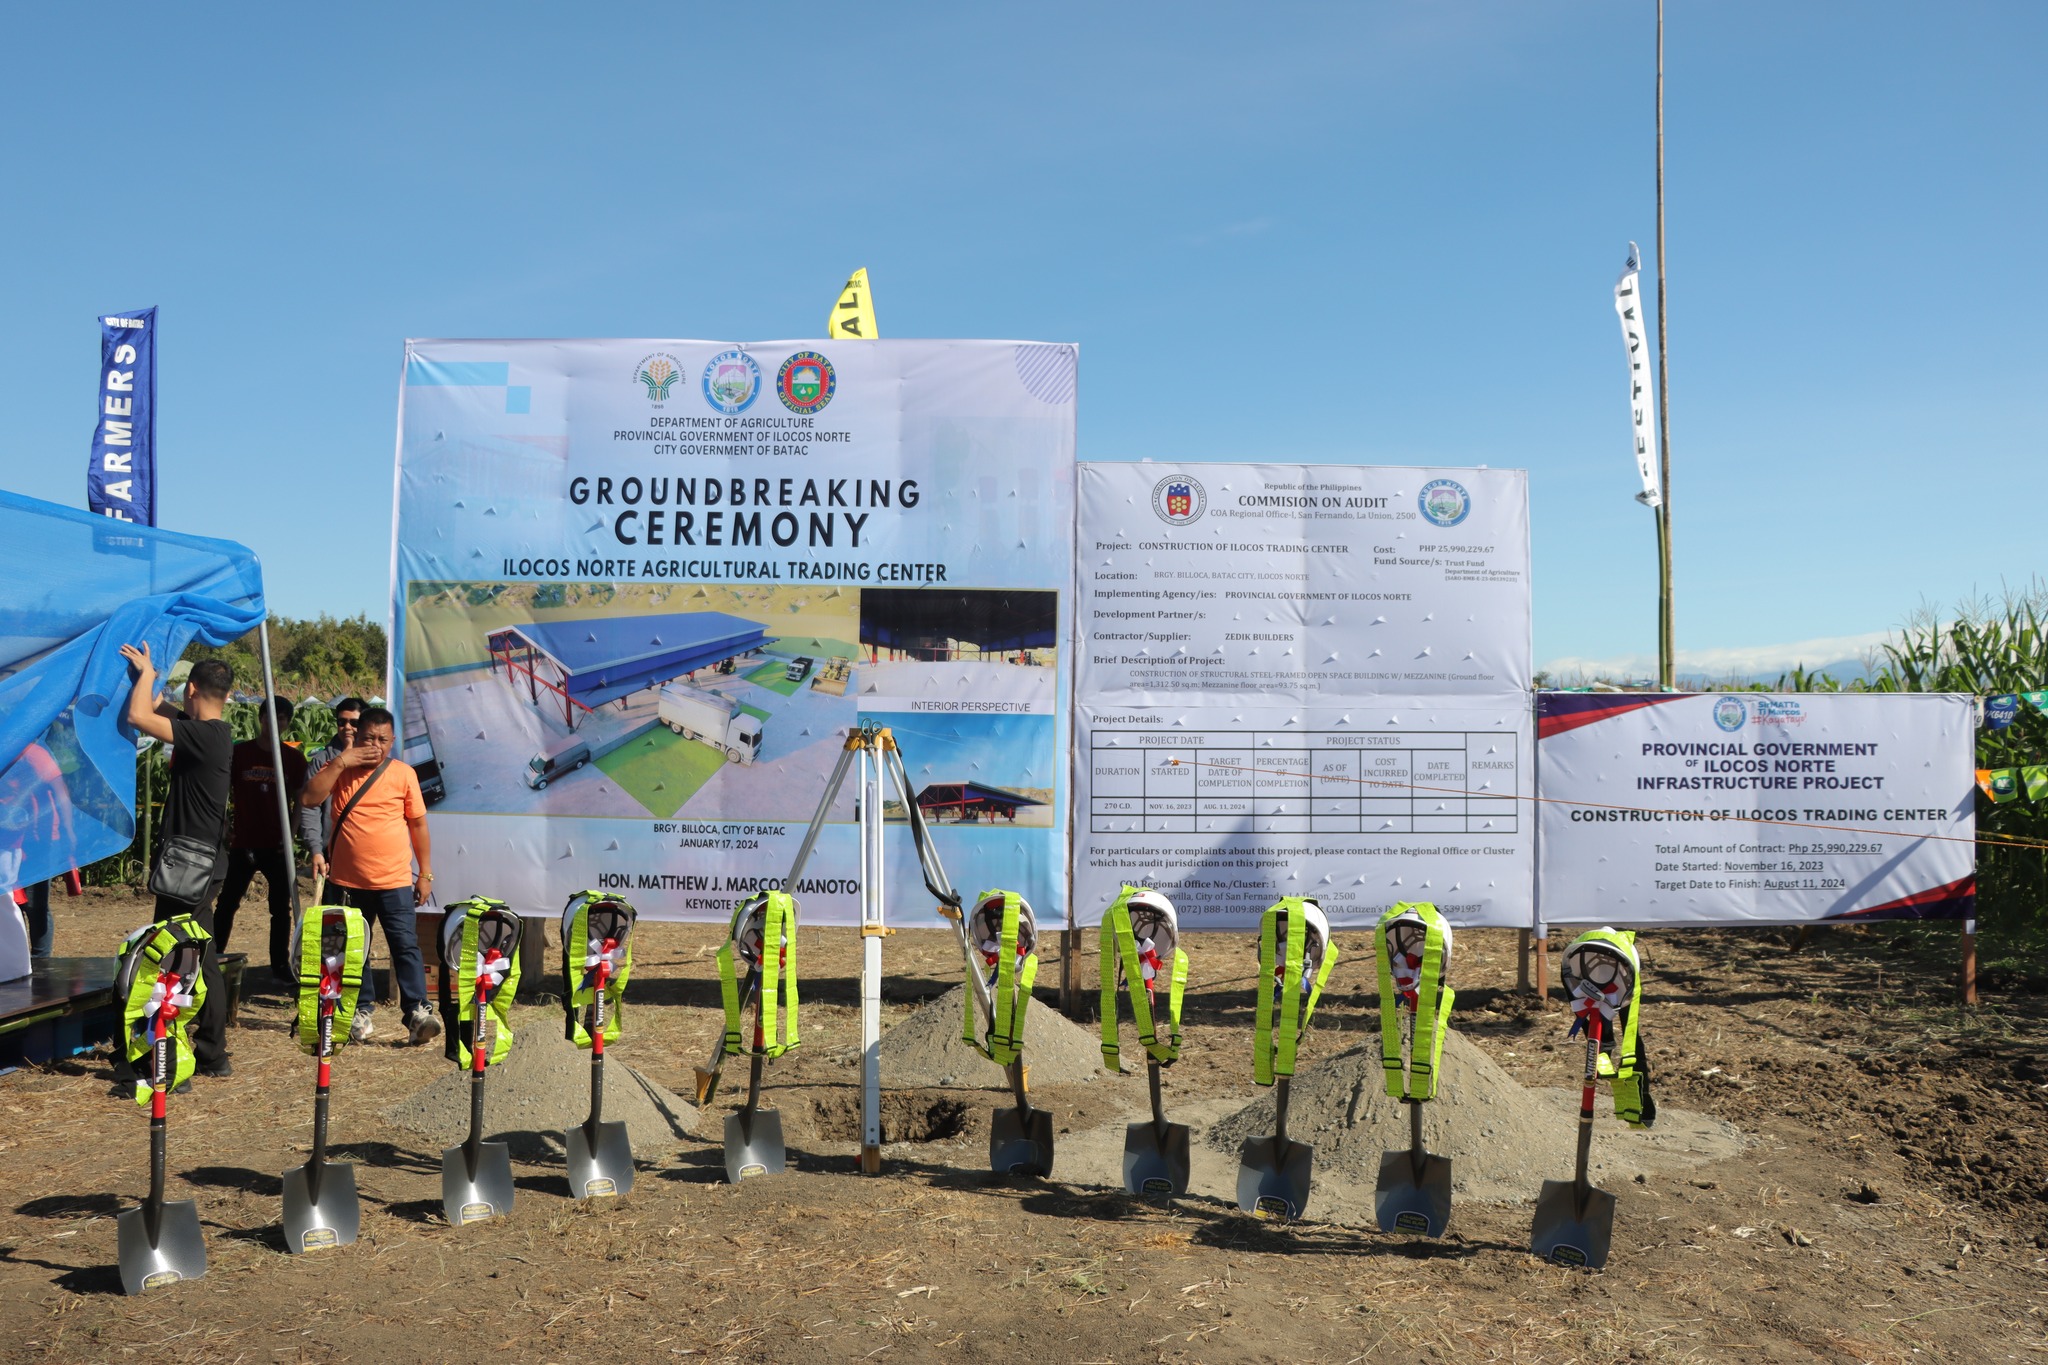 SOON TO RISE IN BATAC: ILOCOS NORTE AGRICULTURAL TRADING CENTER